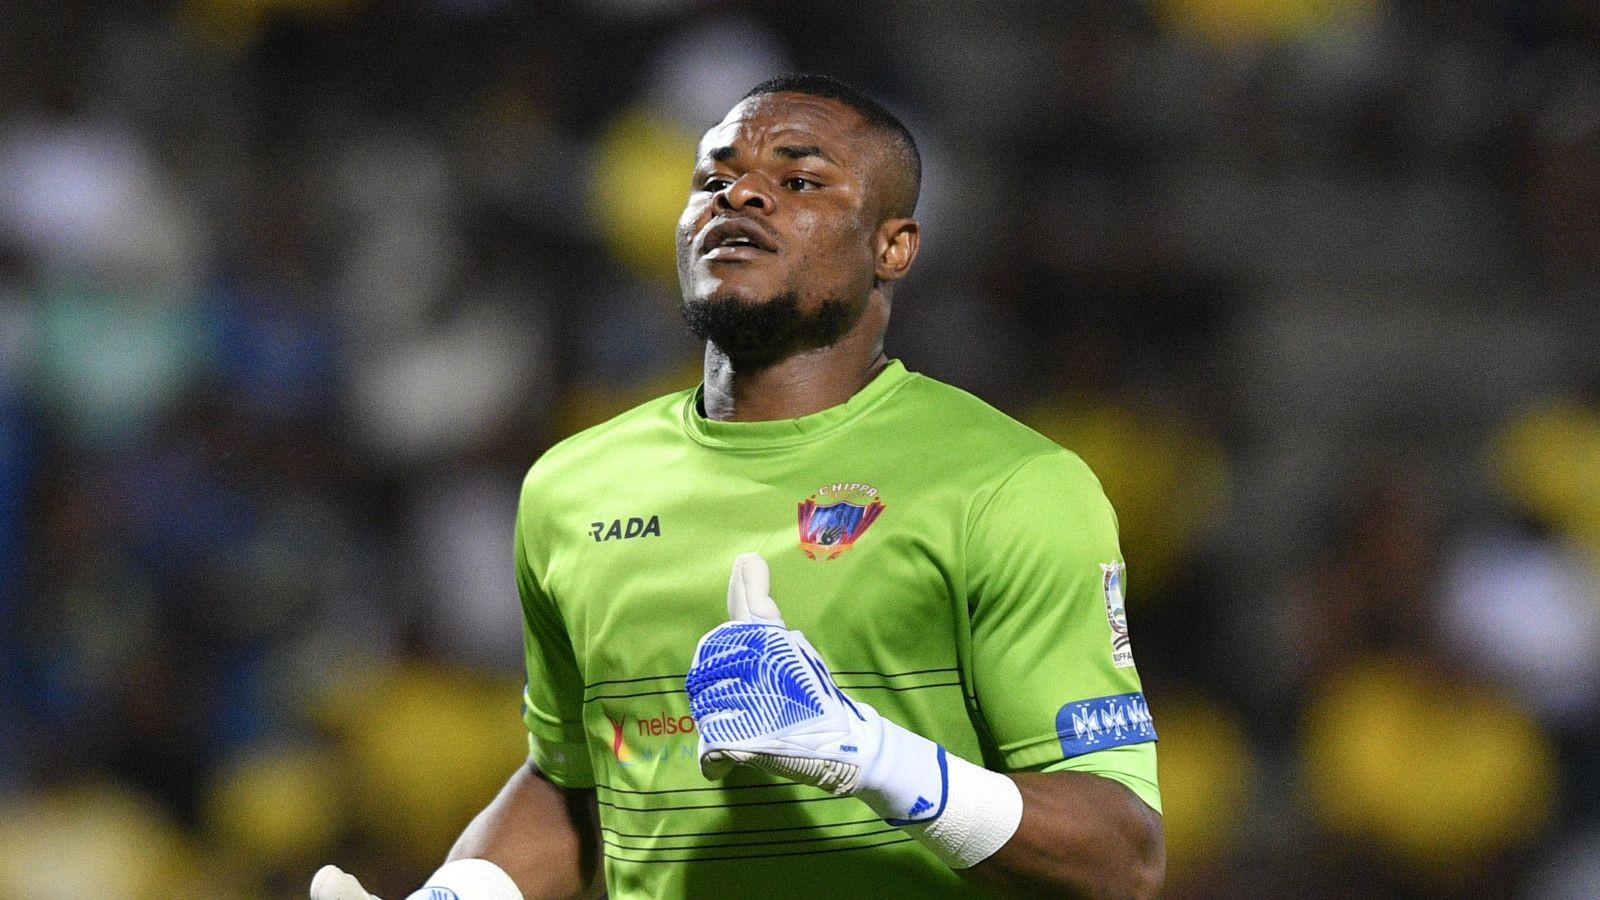 chippa united have 'high possibility' of losing stanley nwabali